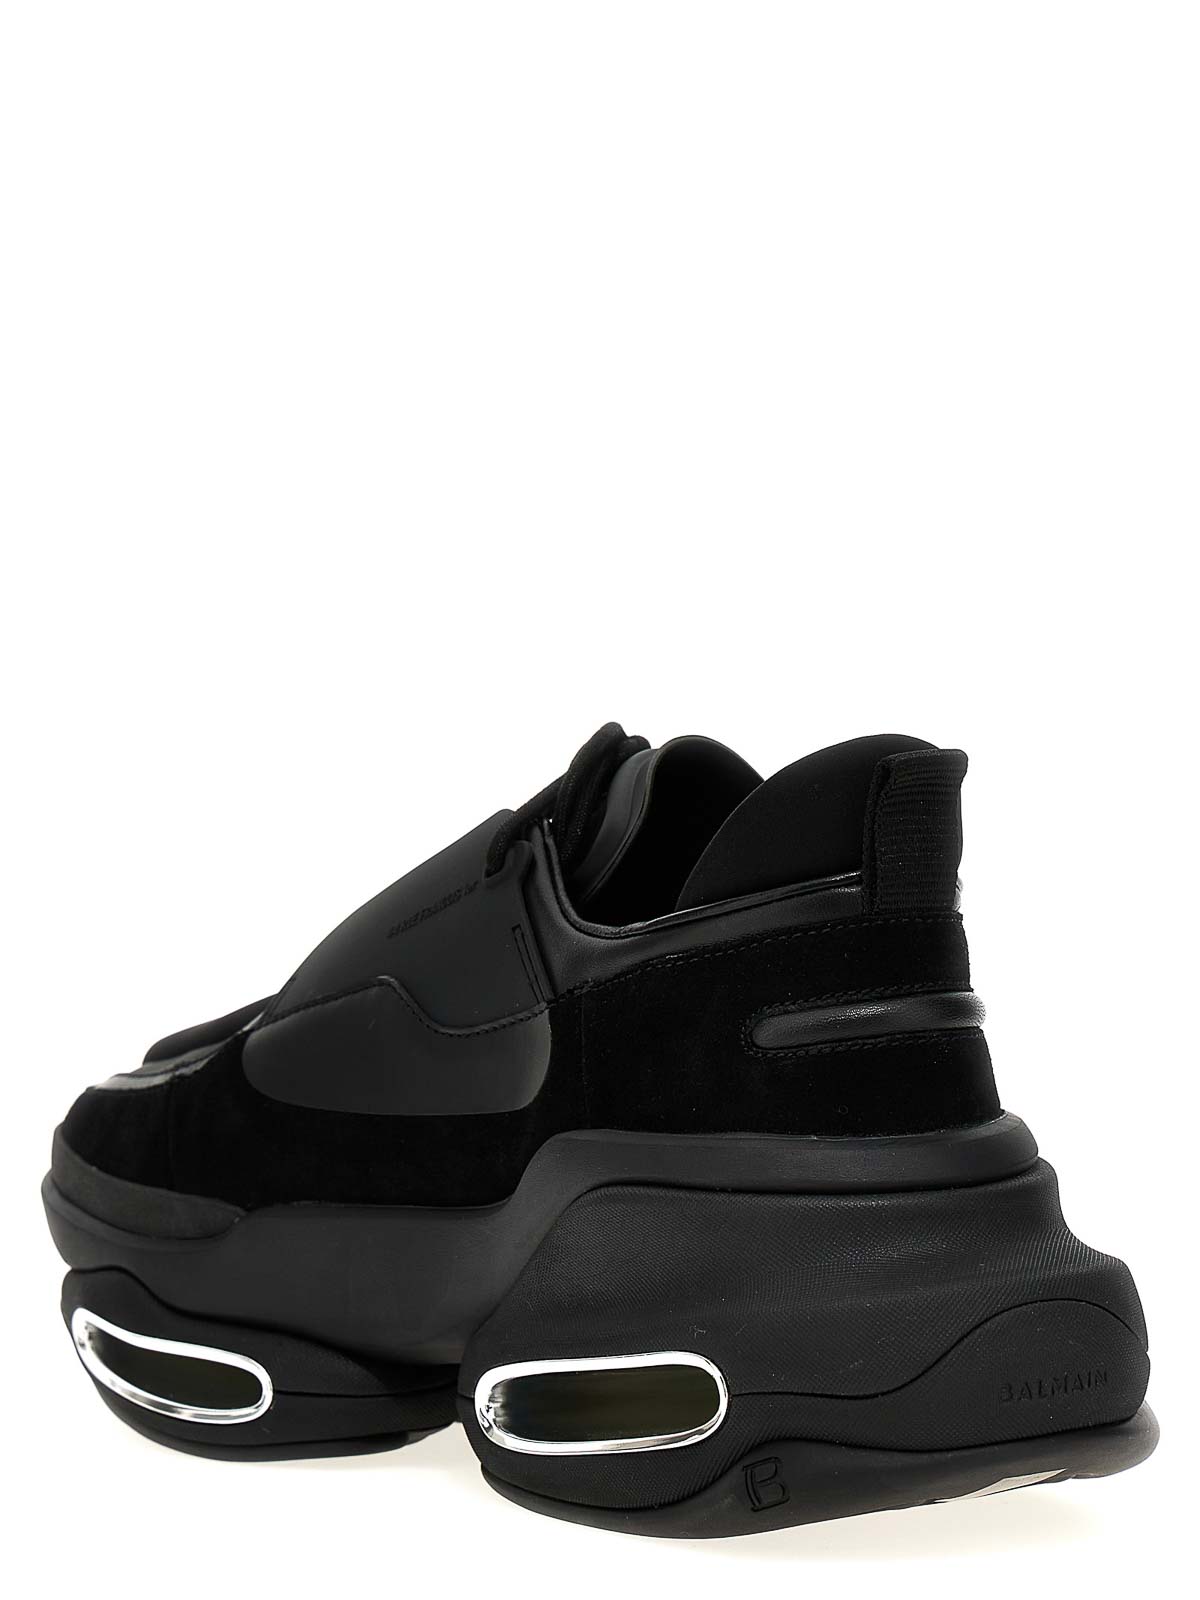 Leather, neoprene and suede B-Bold low-top sneakers black - Men